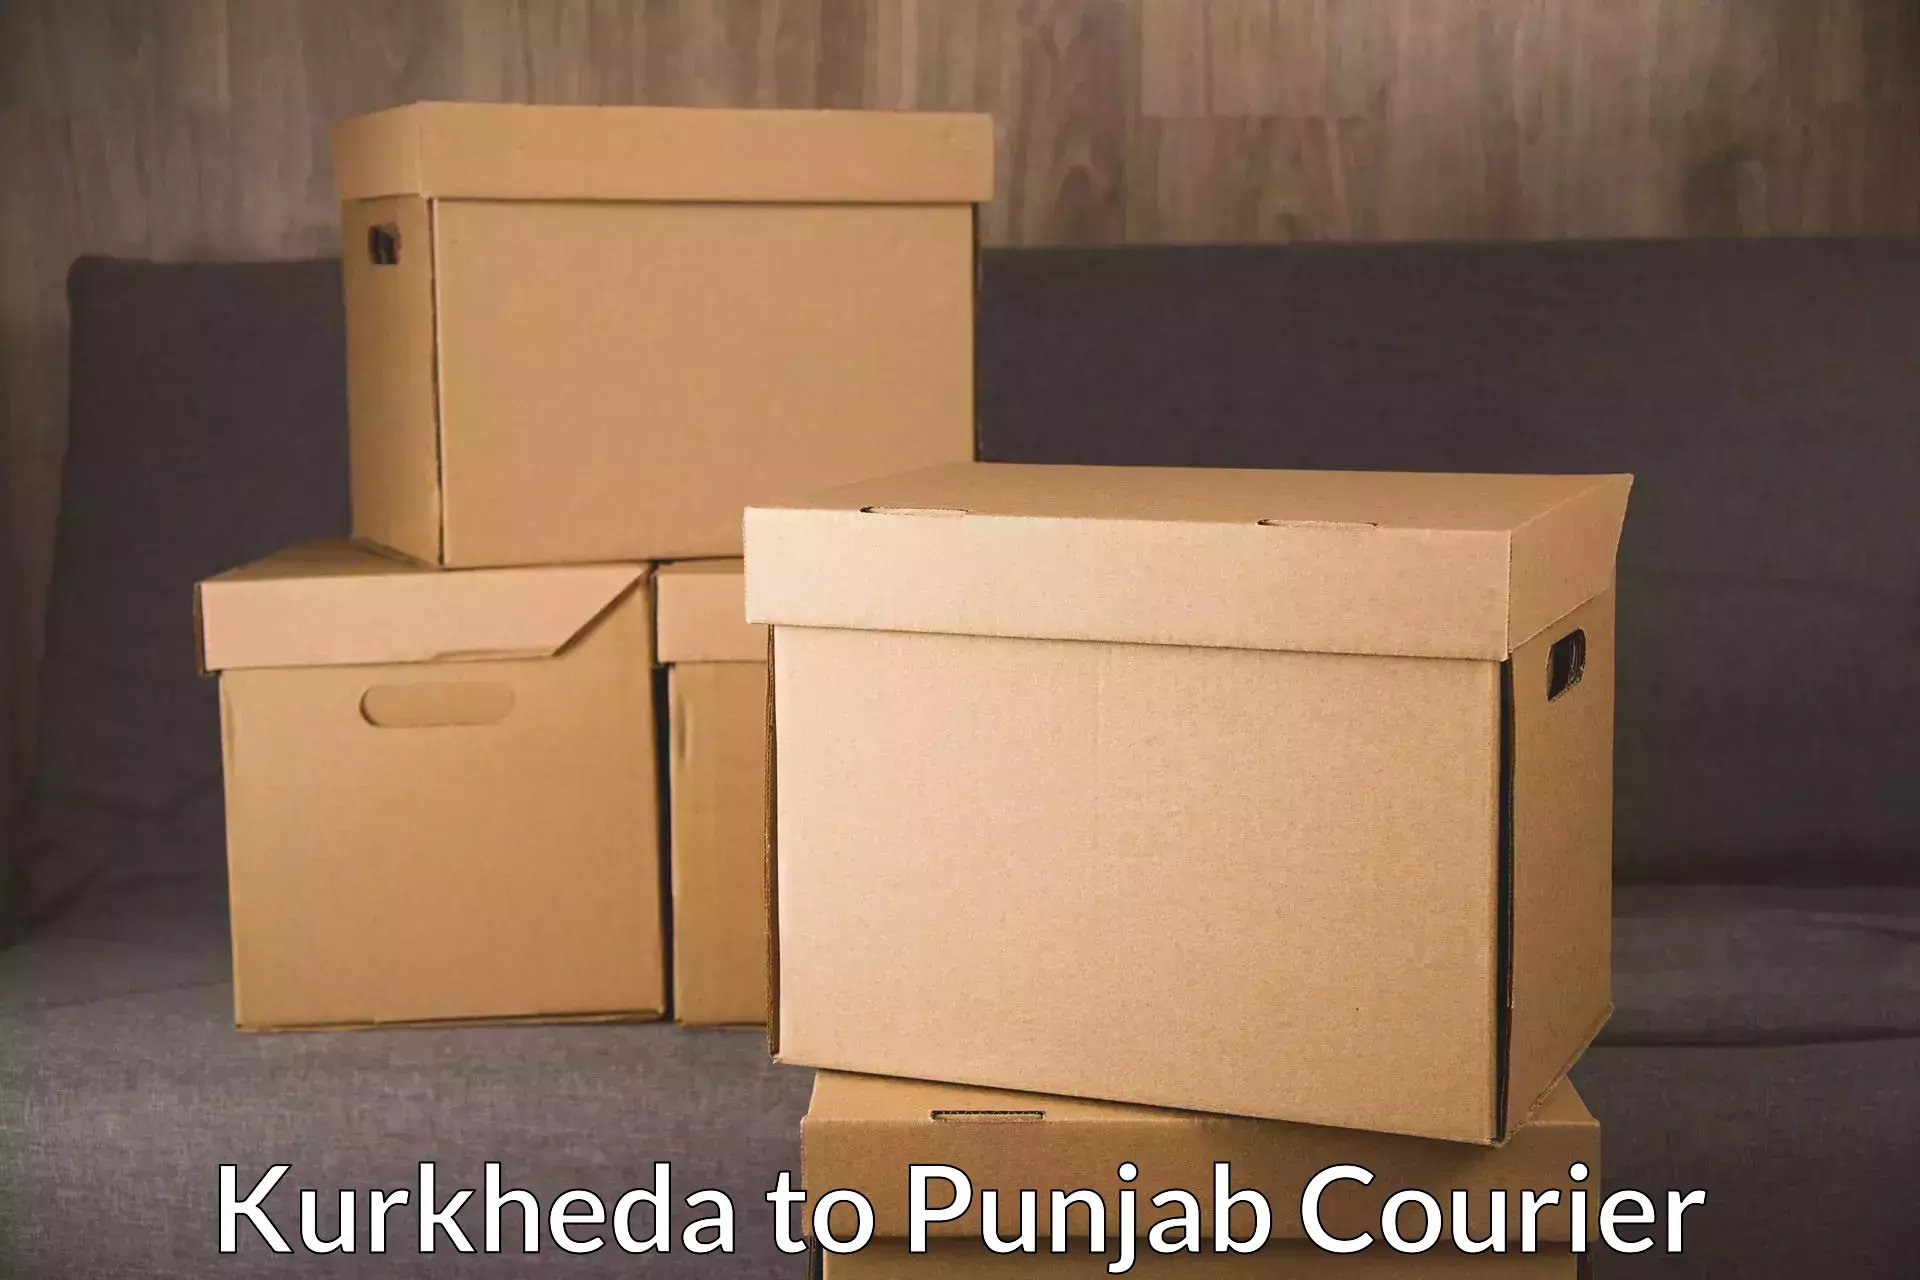 On-demand delivery in Kurkheda to Amritsar